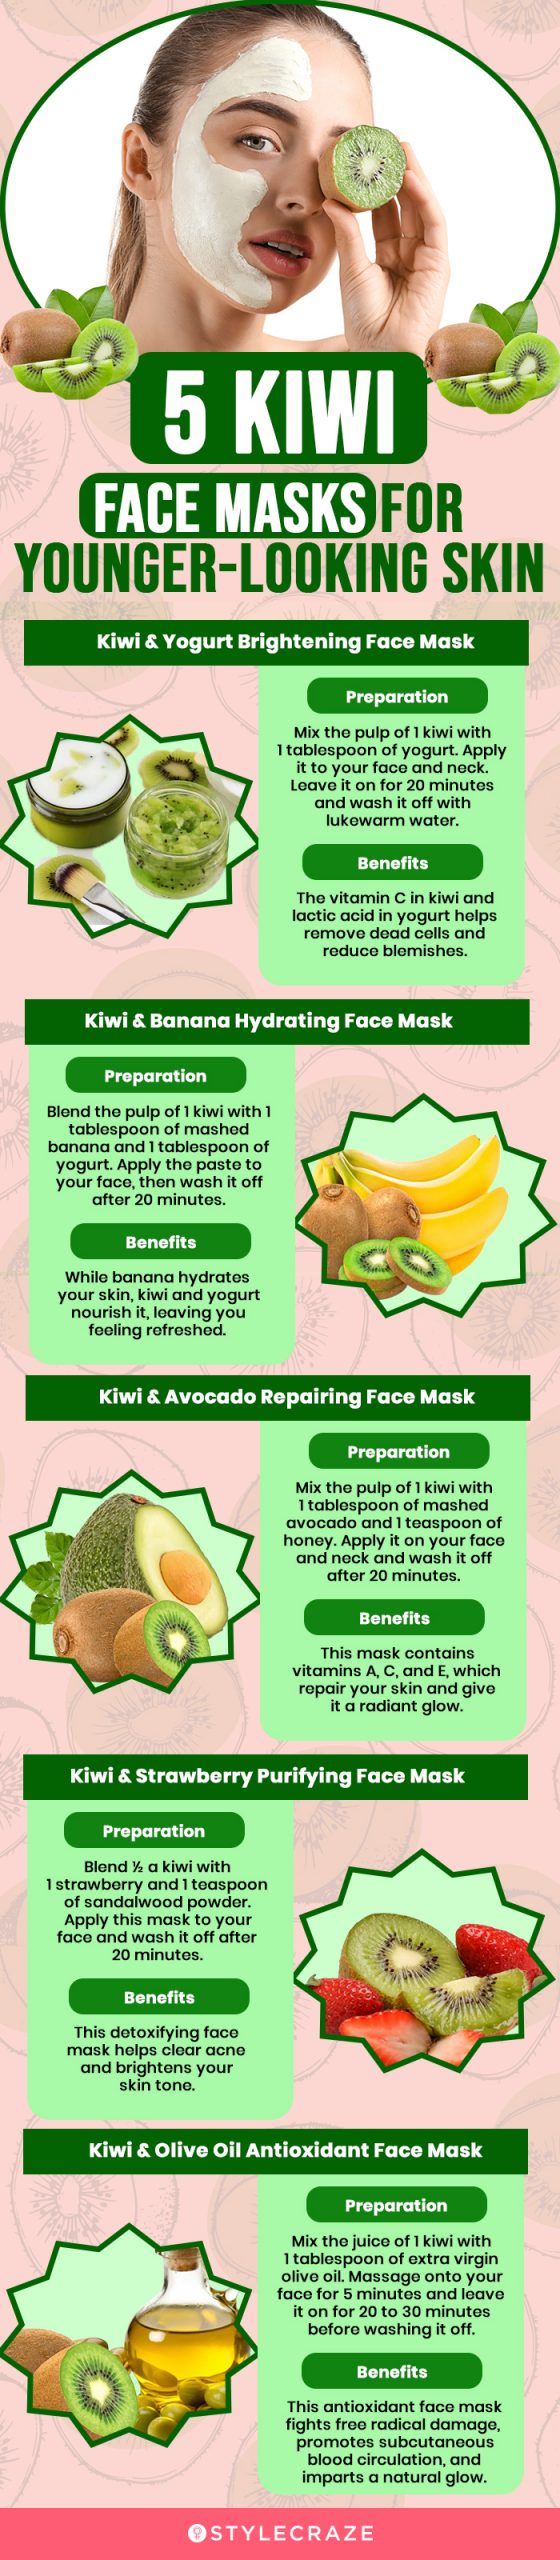 5 kiwi face masks for younger-looking skin (infographic)